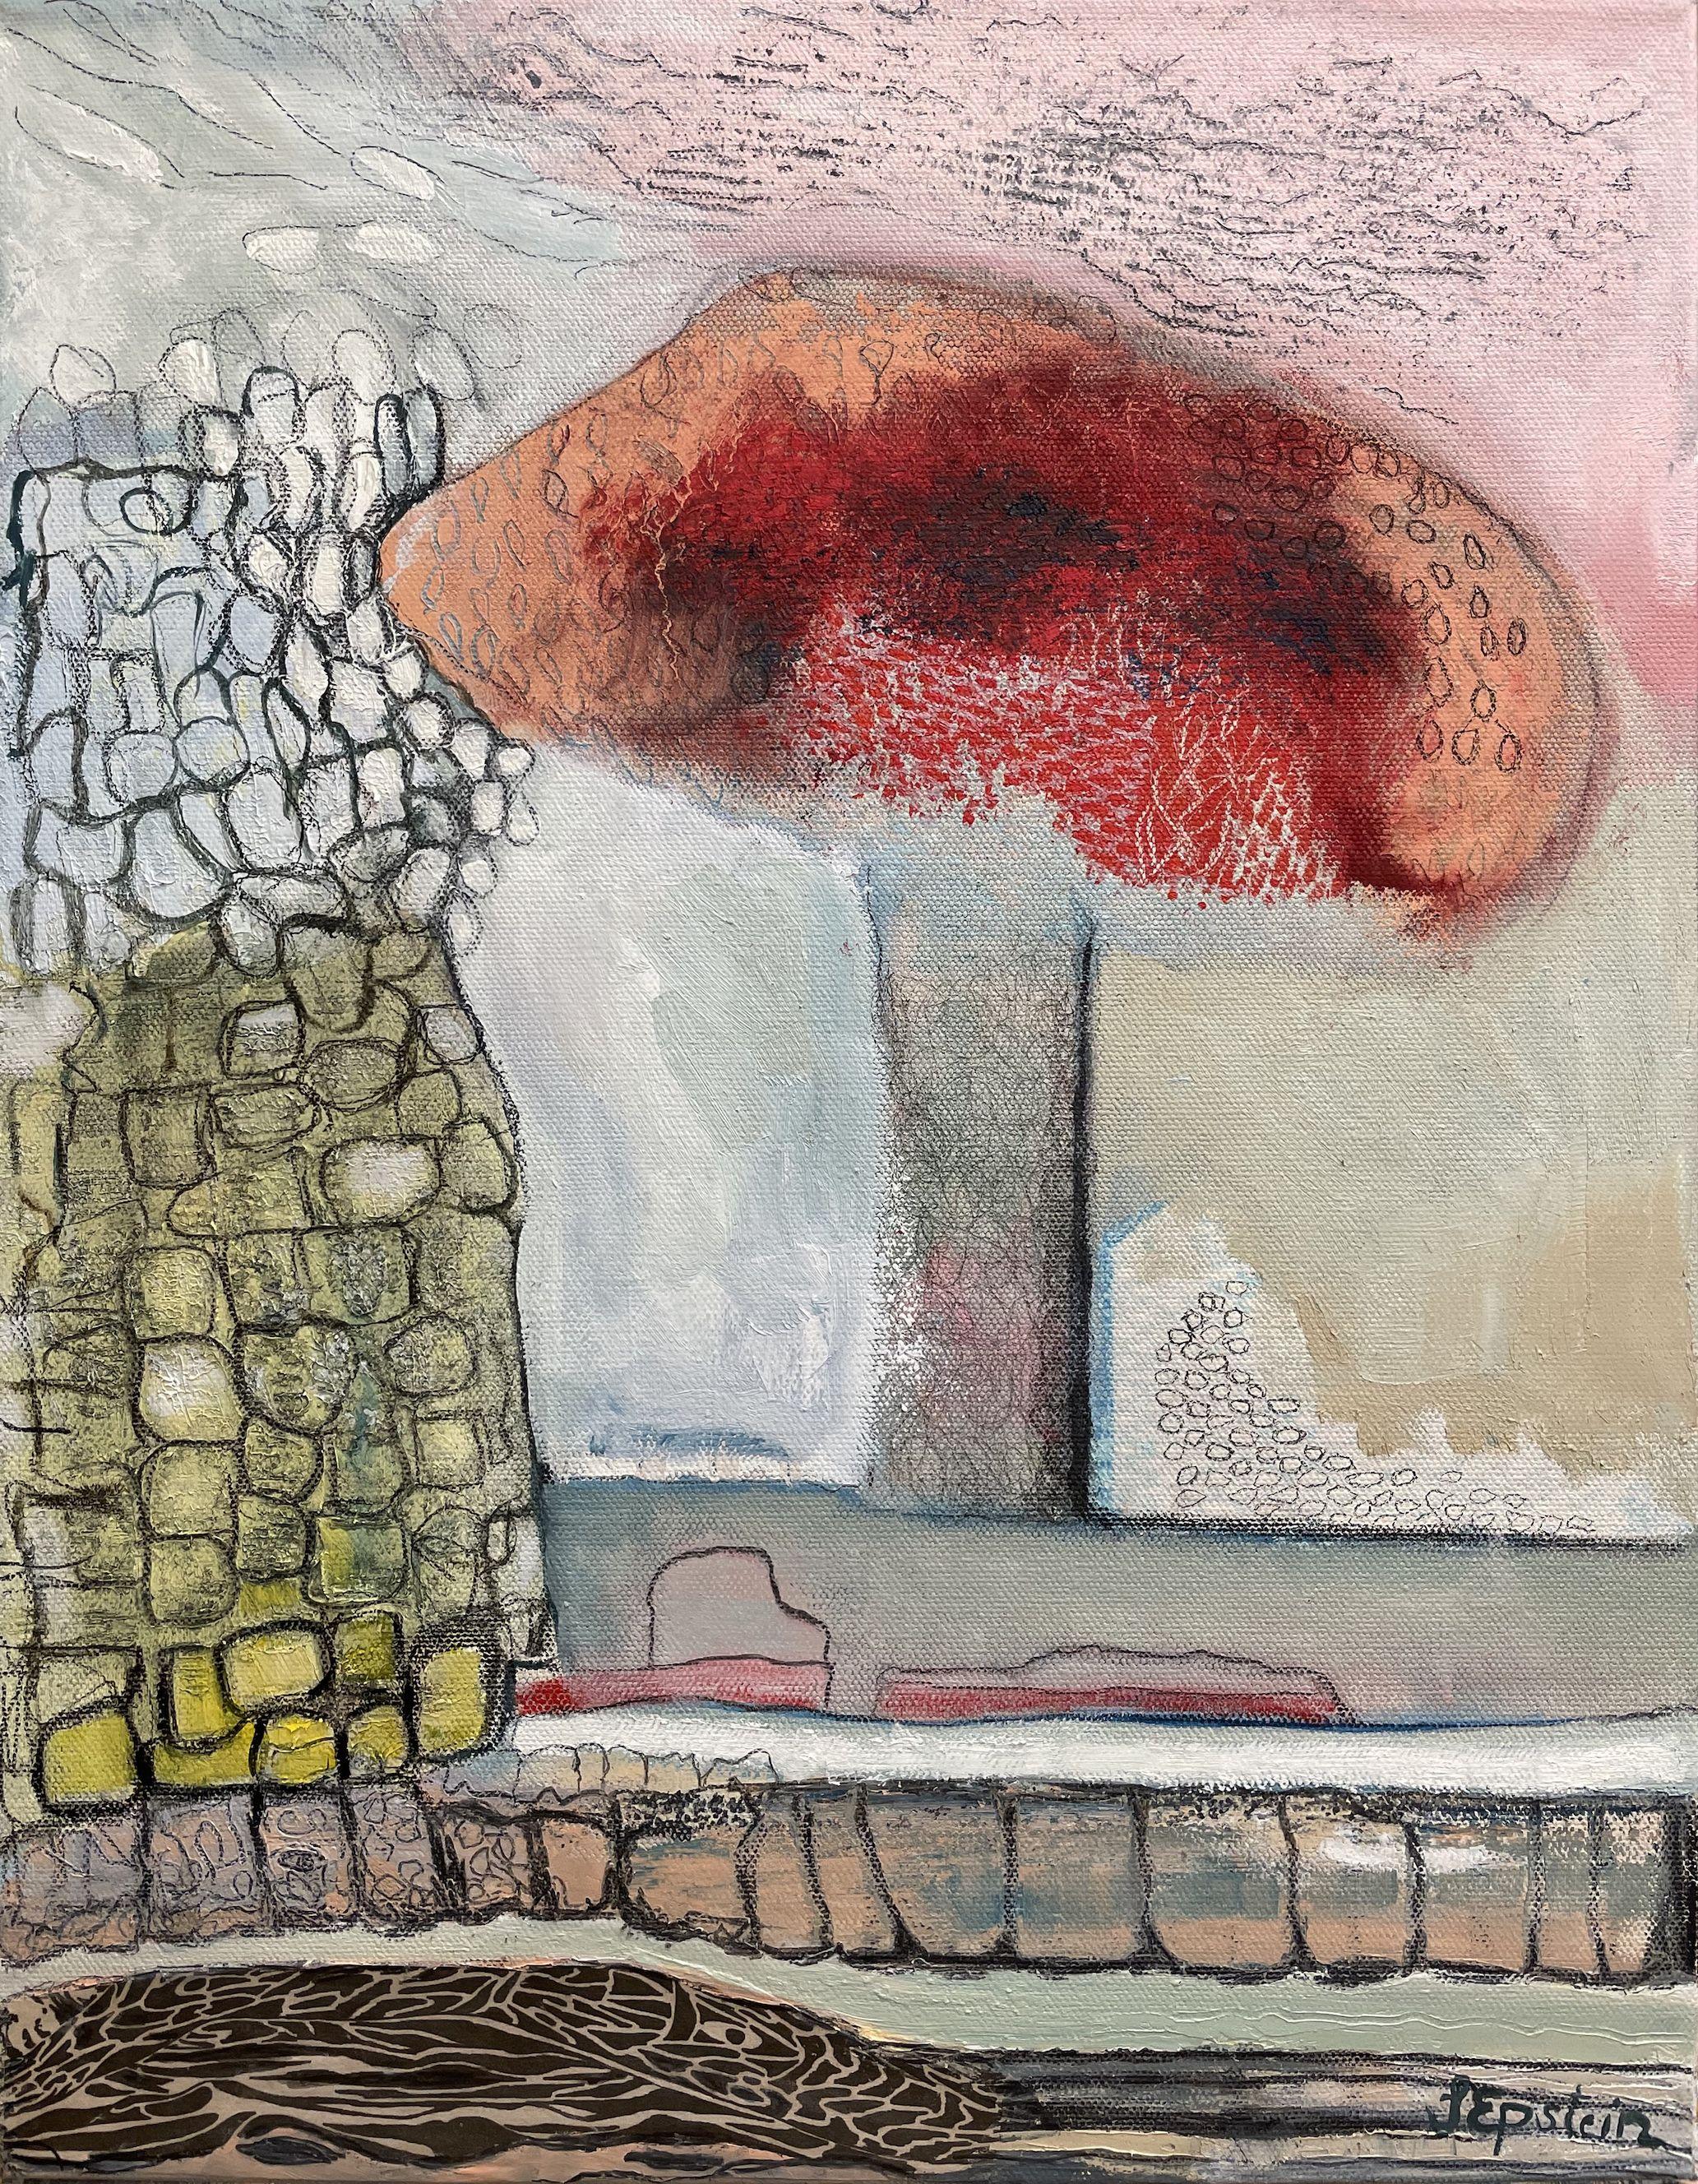 Irit's paintings are a personal diary and a reflection of a continuing journey within herself, carrying on a dialogue with her changing environment and responding through symbolic imagery. This visual exploration reflects the constant interaction